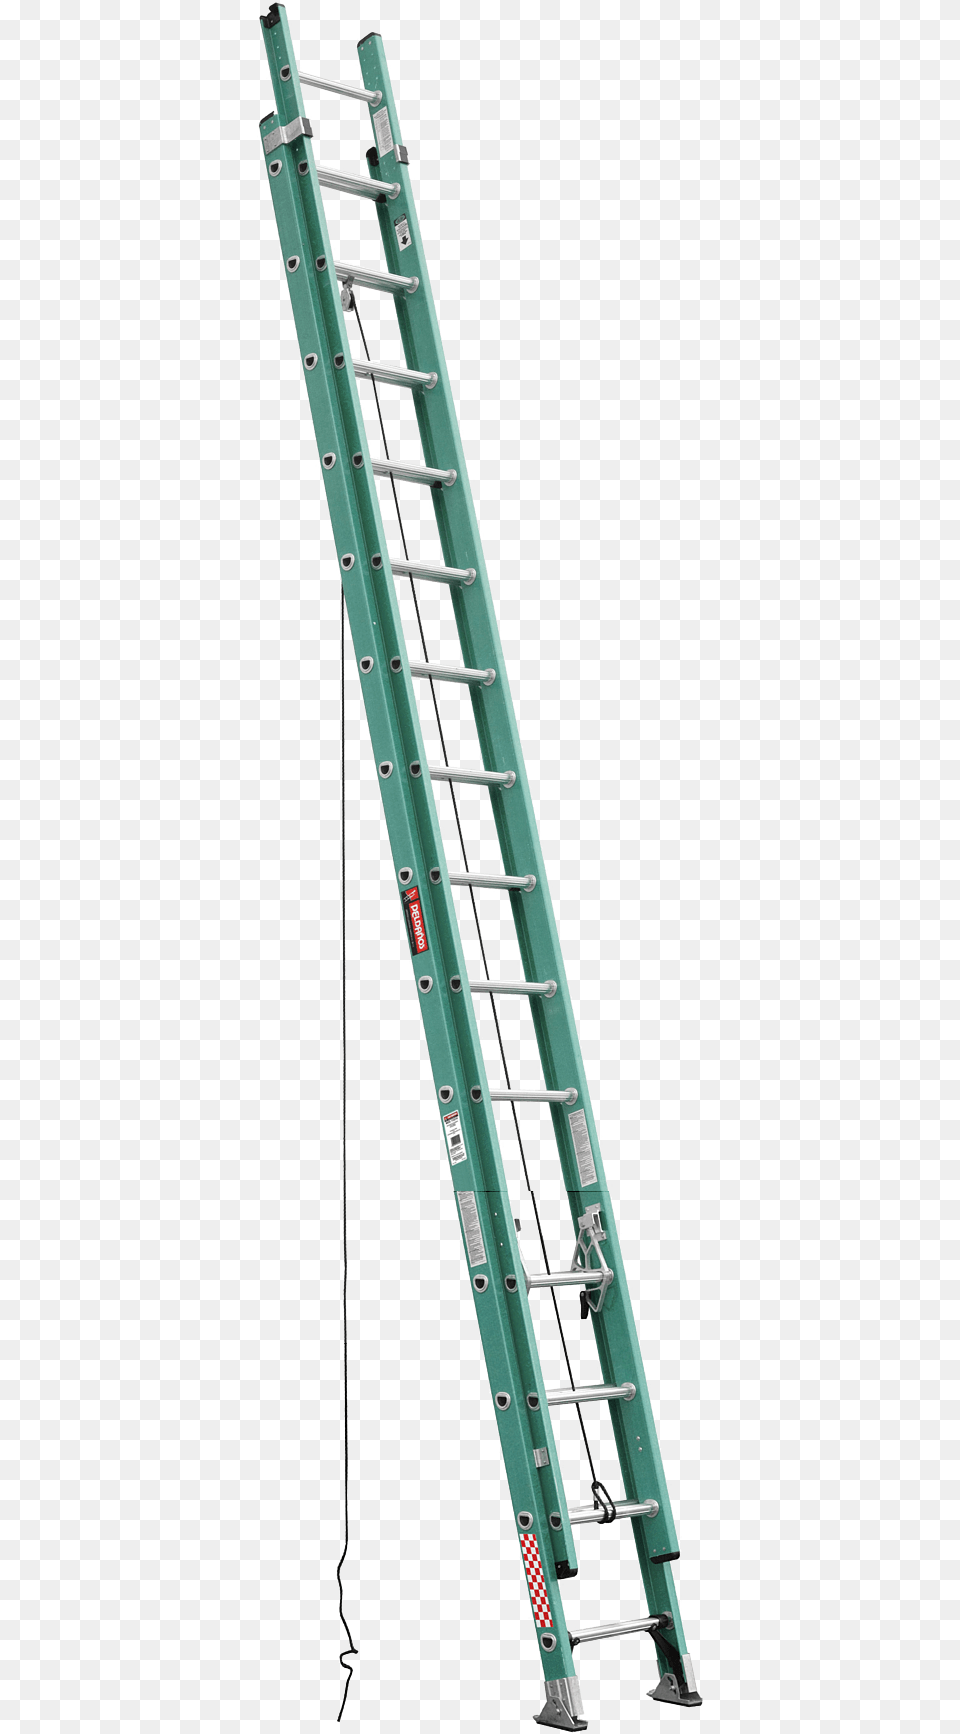 Parts Of Extension Ladder Firefighter, City, Construction, Urban, Construction Crane Free Png Download